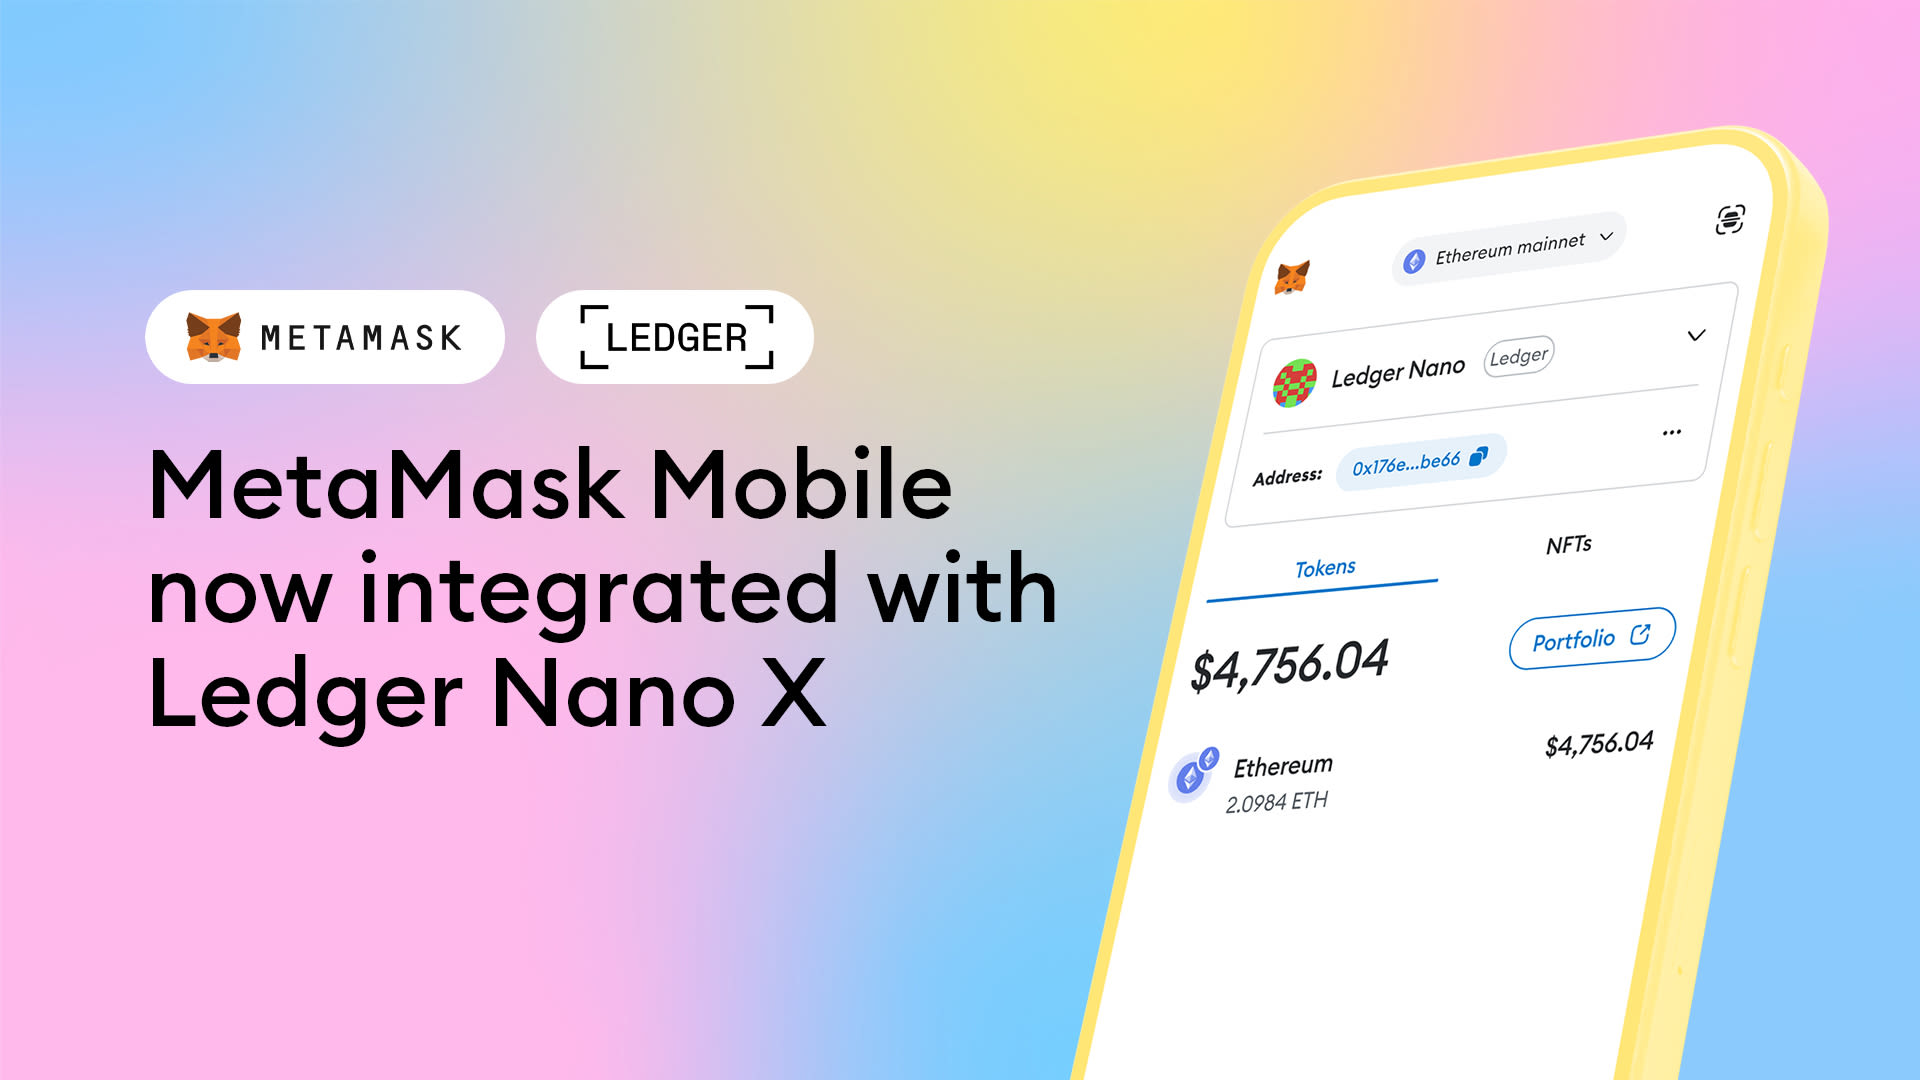 MetaMask Mobile now integrated with Ledger Nano X